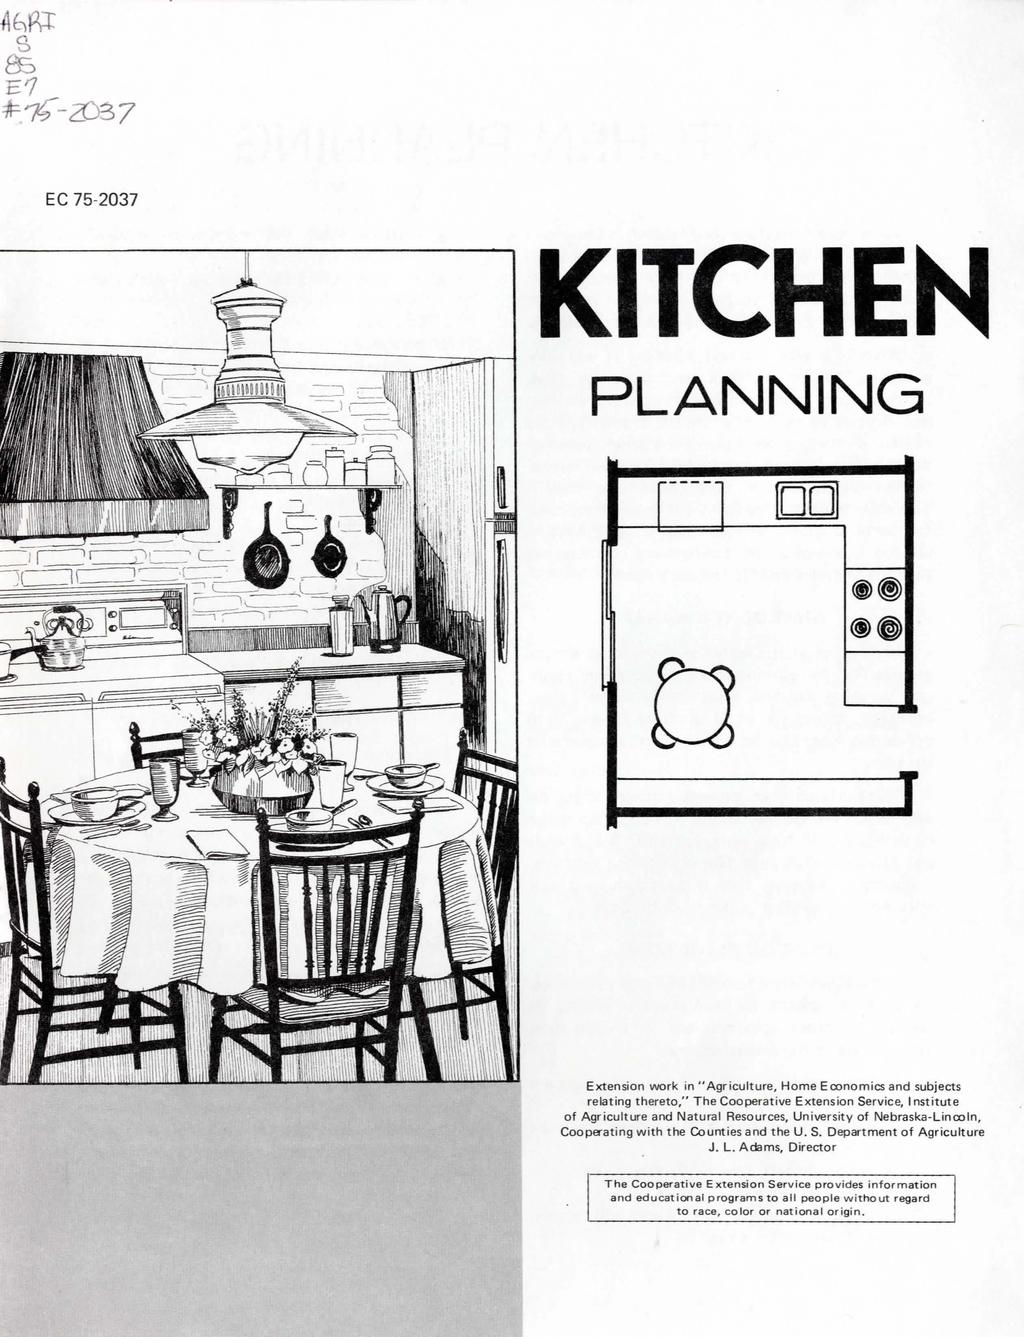 EC 75-2037 KITCHEN PLANNING r---- 00 (t)@ @~ D -- Extension work in" Agr iculture, Home Eoonomics and subjects relating thereto," The Cooperative Extension Service, Inst itute of Agriculture and